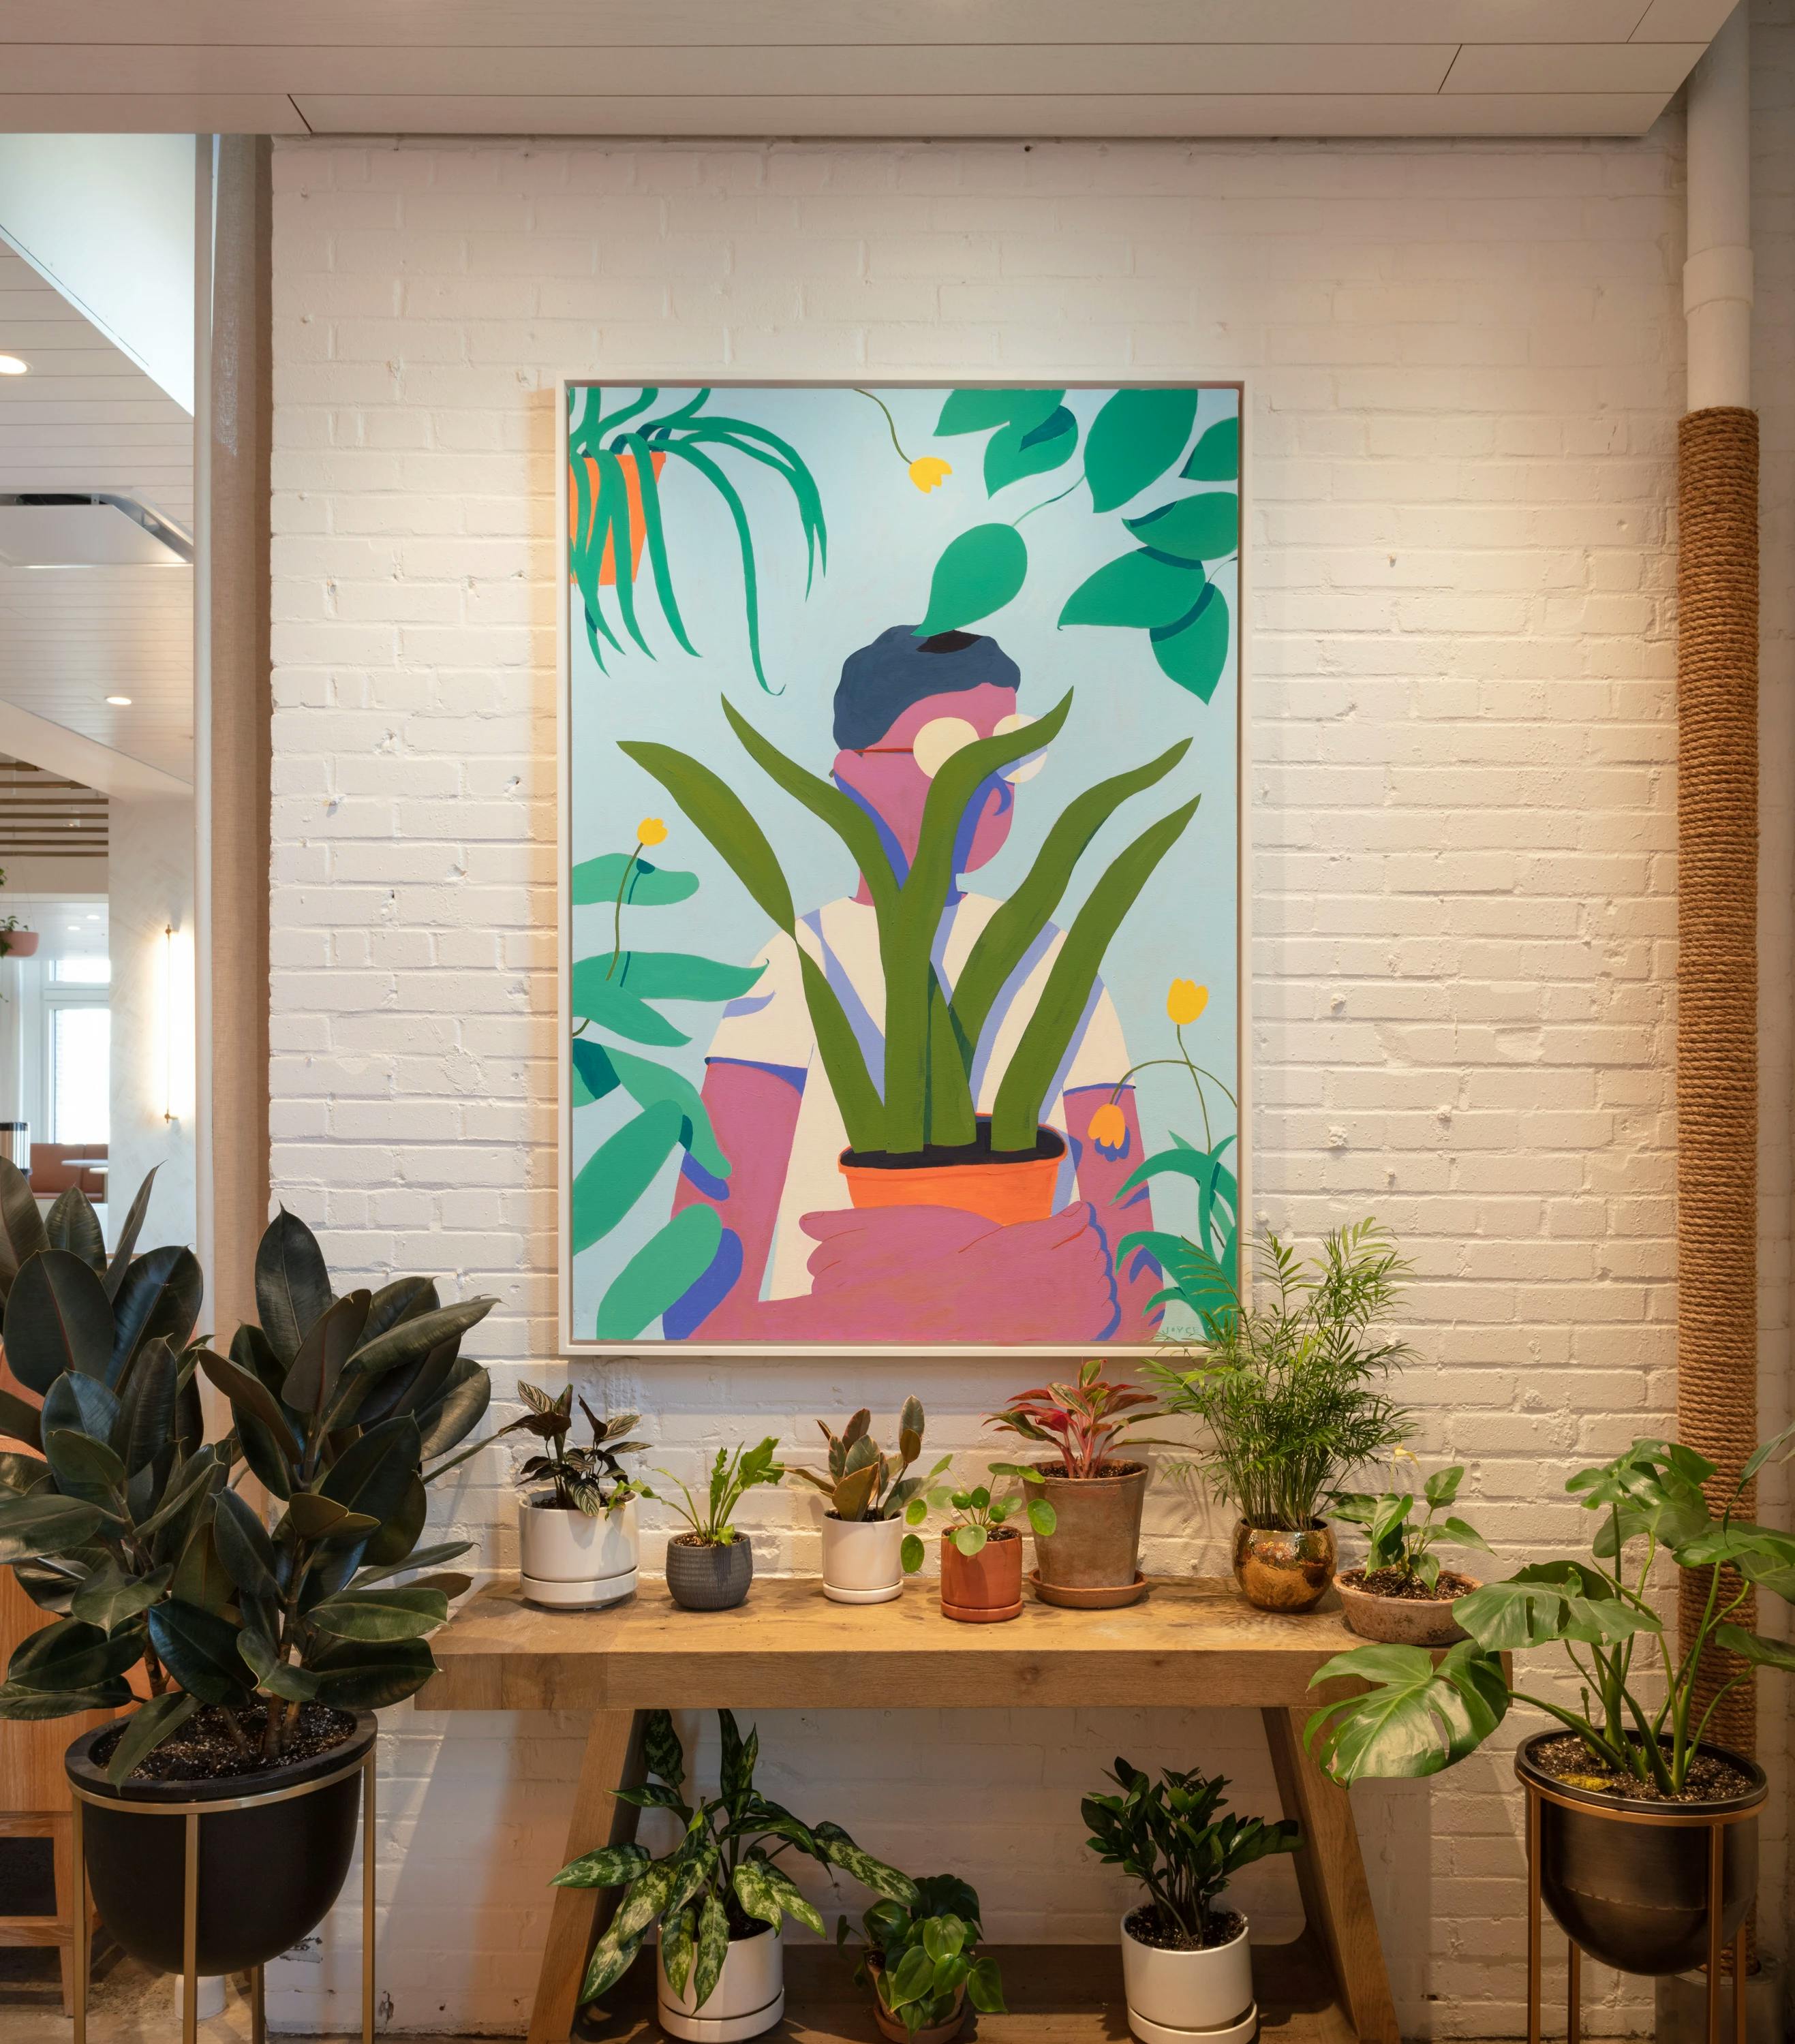 A painting by artist Jackson Joyce, depicting a person wearing glasses and standing among plants, installed above a table full of houseplants.